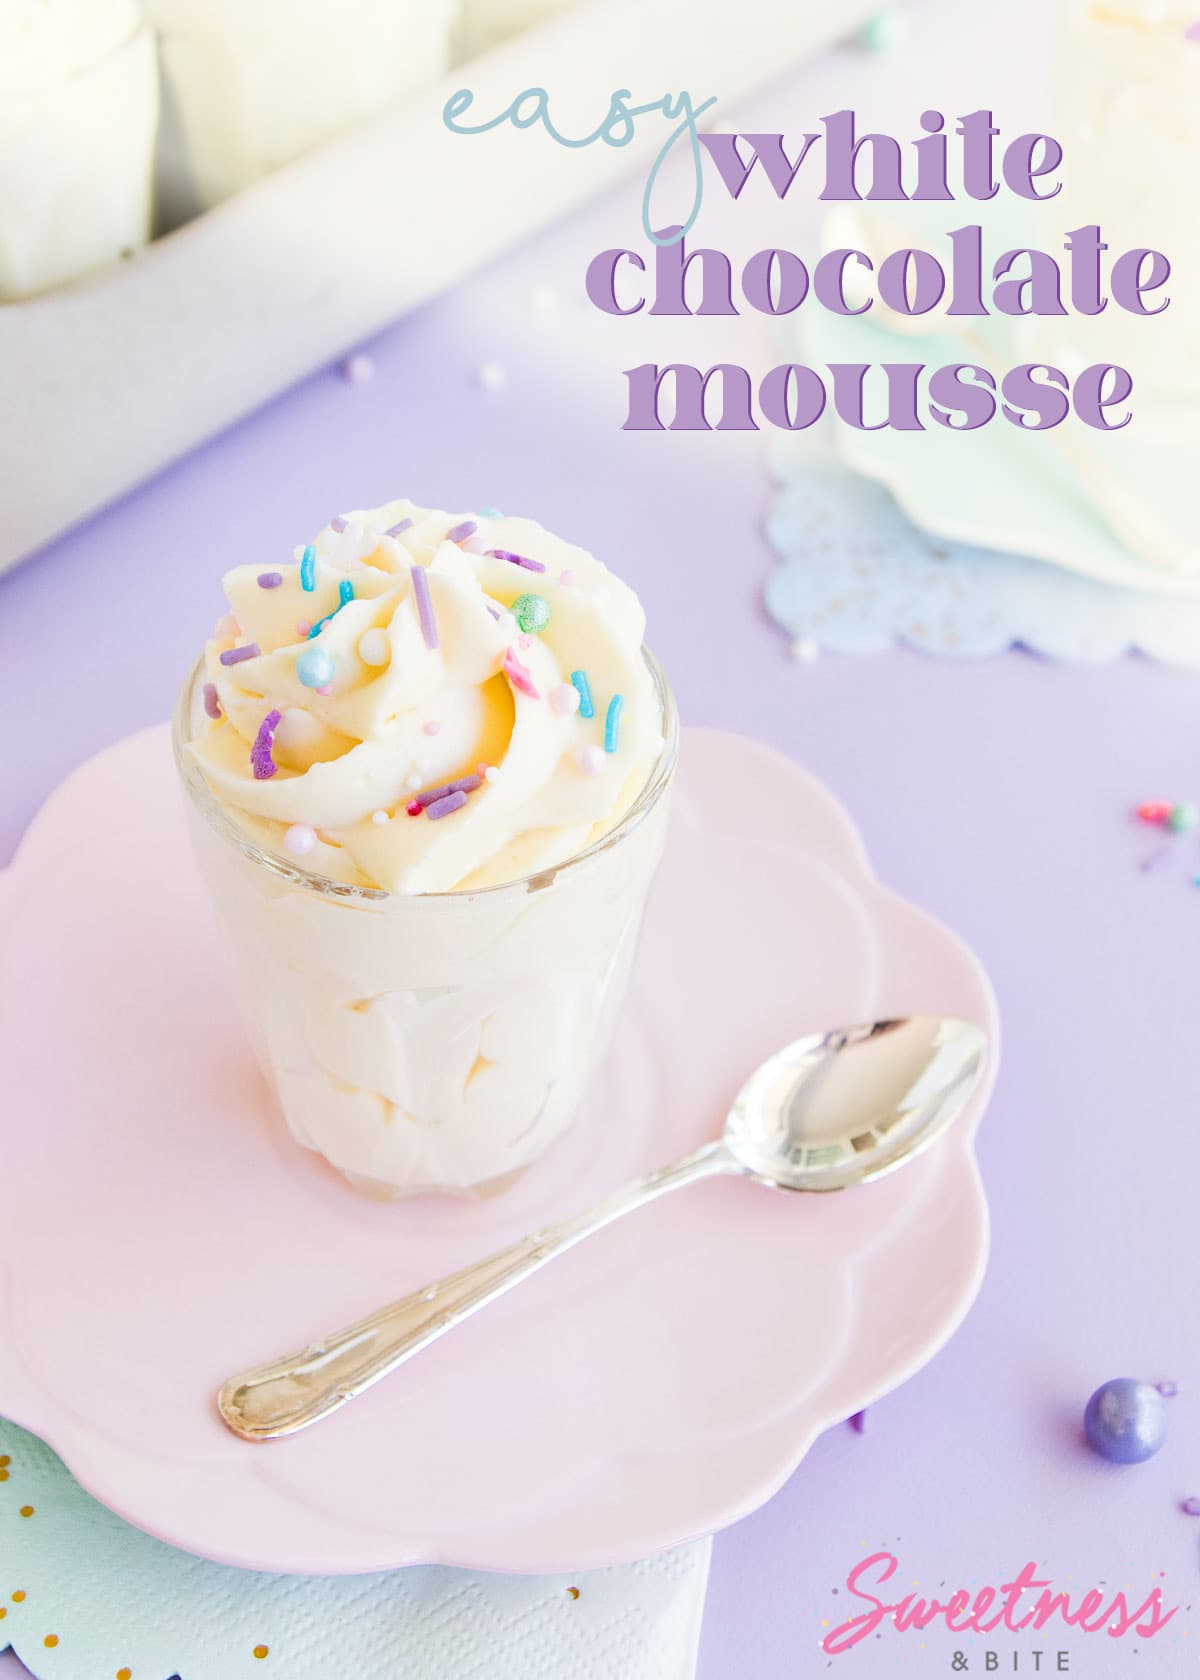 A small glass of mousse, on a pale pink plate against a purple background, text overlay reads 